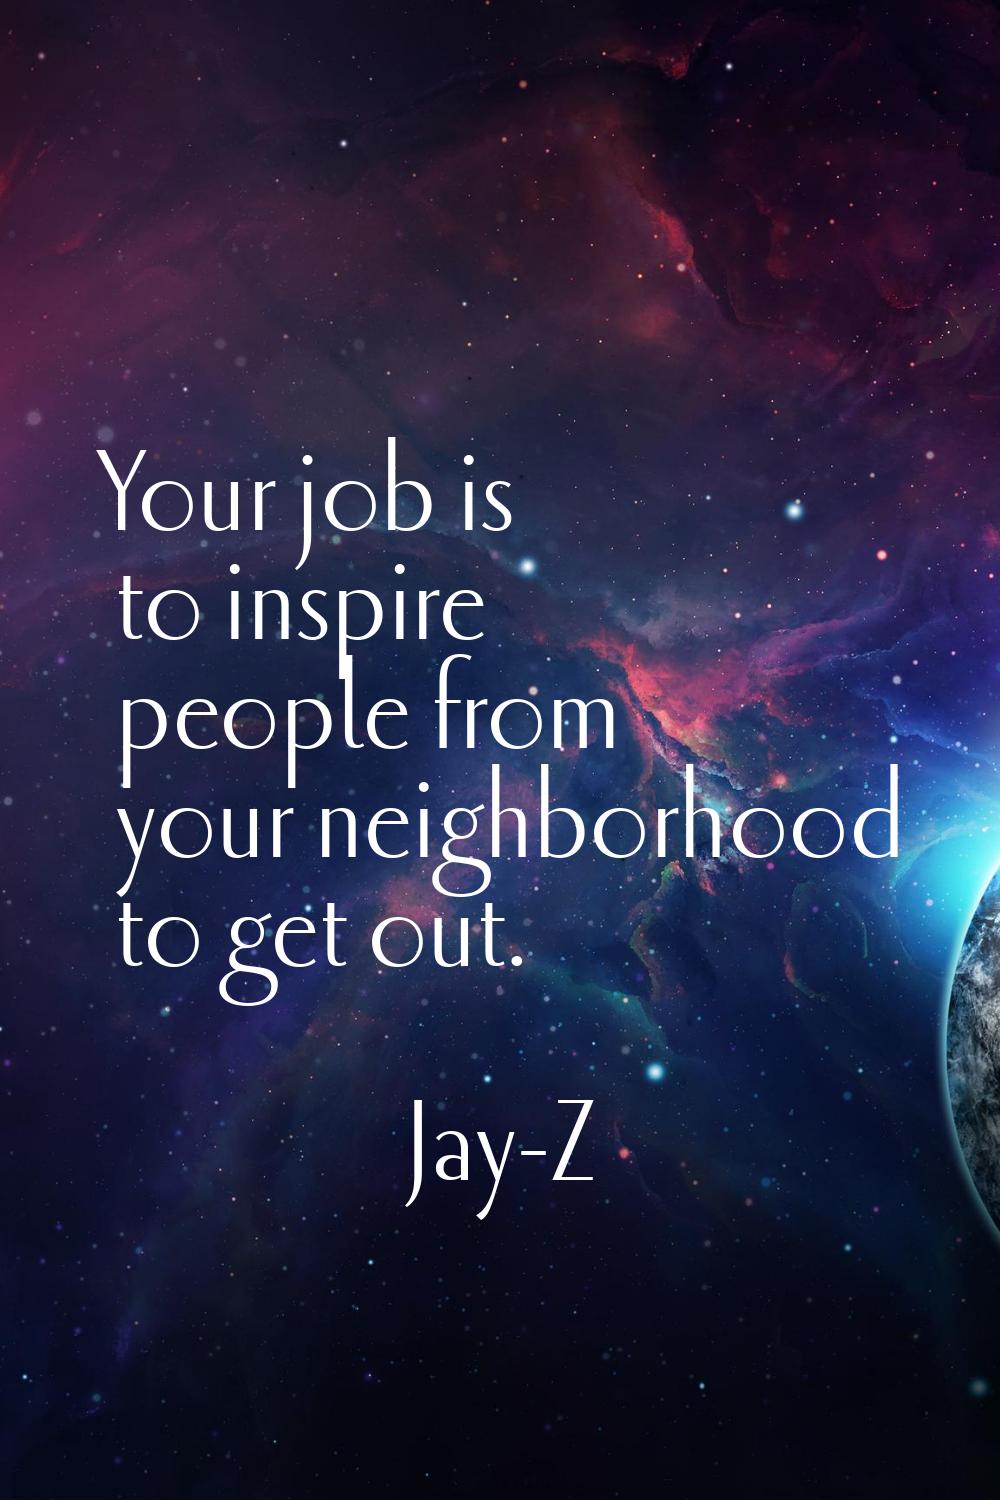 Your job is to inspire people from your neighborhood to get out.